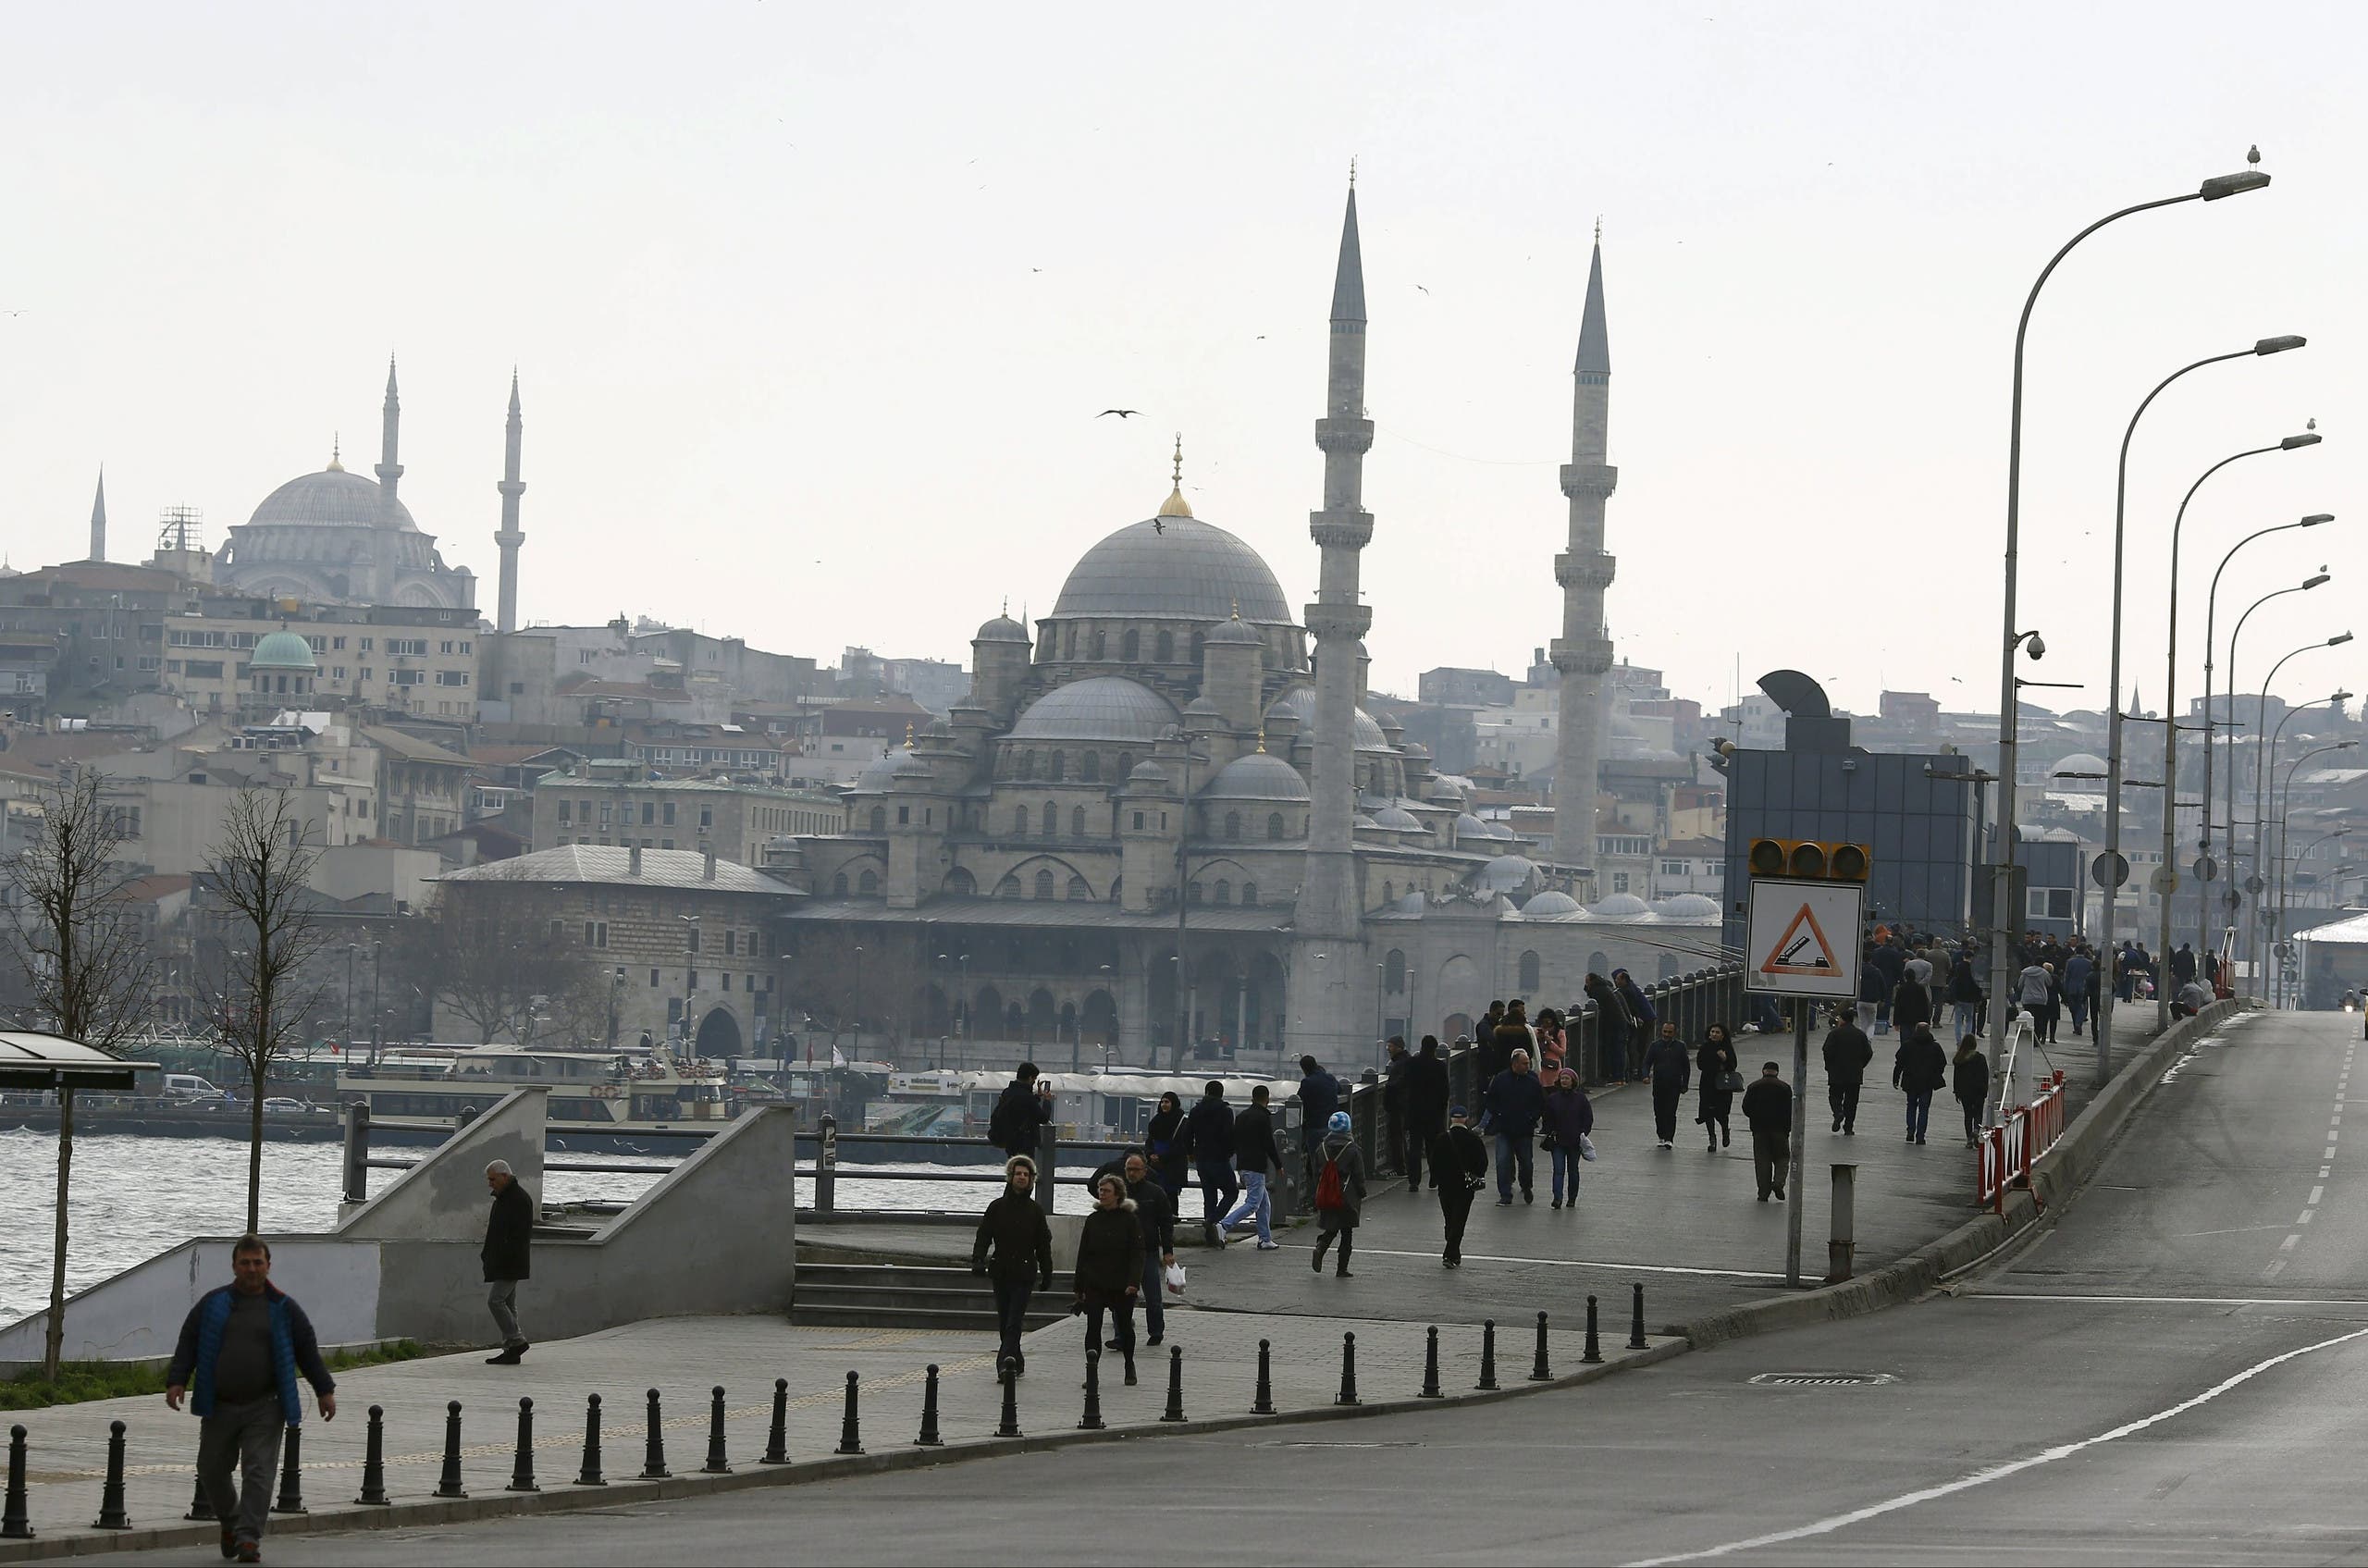 Turkey has been hit by four suicide bombings already this year, most recently in Istanbul last month where two of the bombings have been blamed on ISIS. (Reuters)